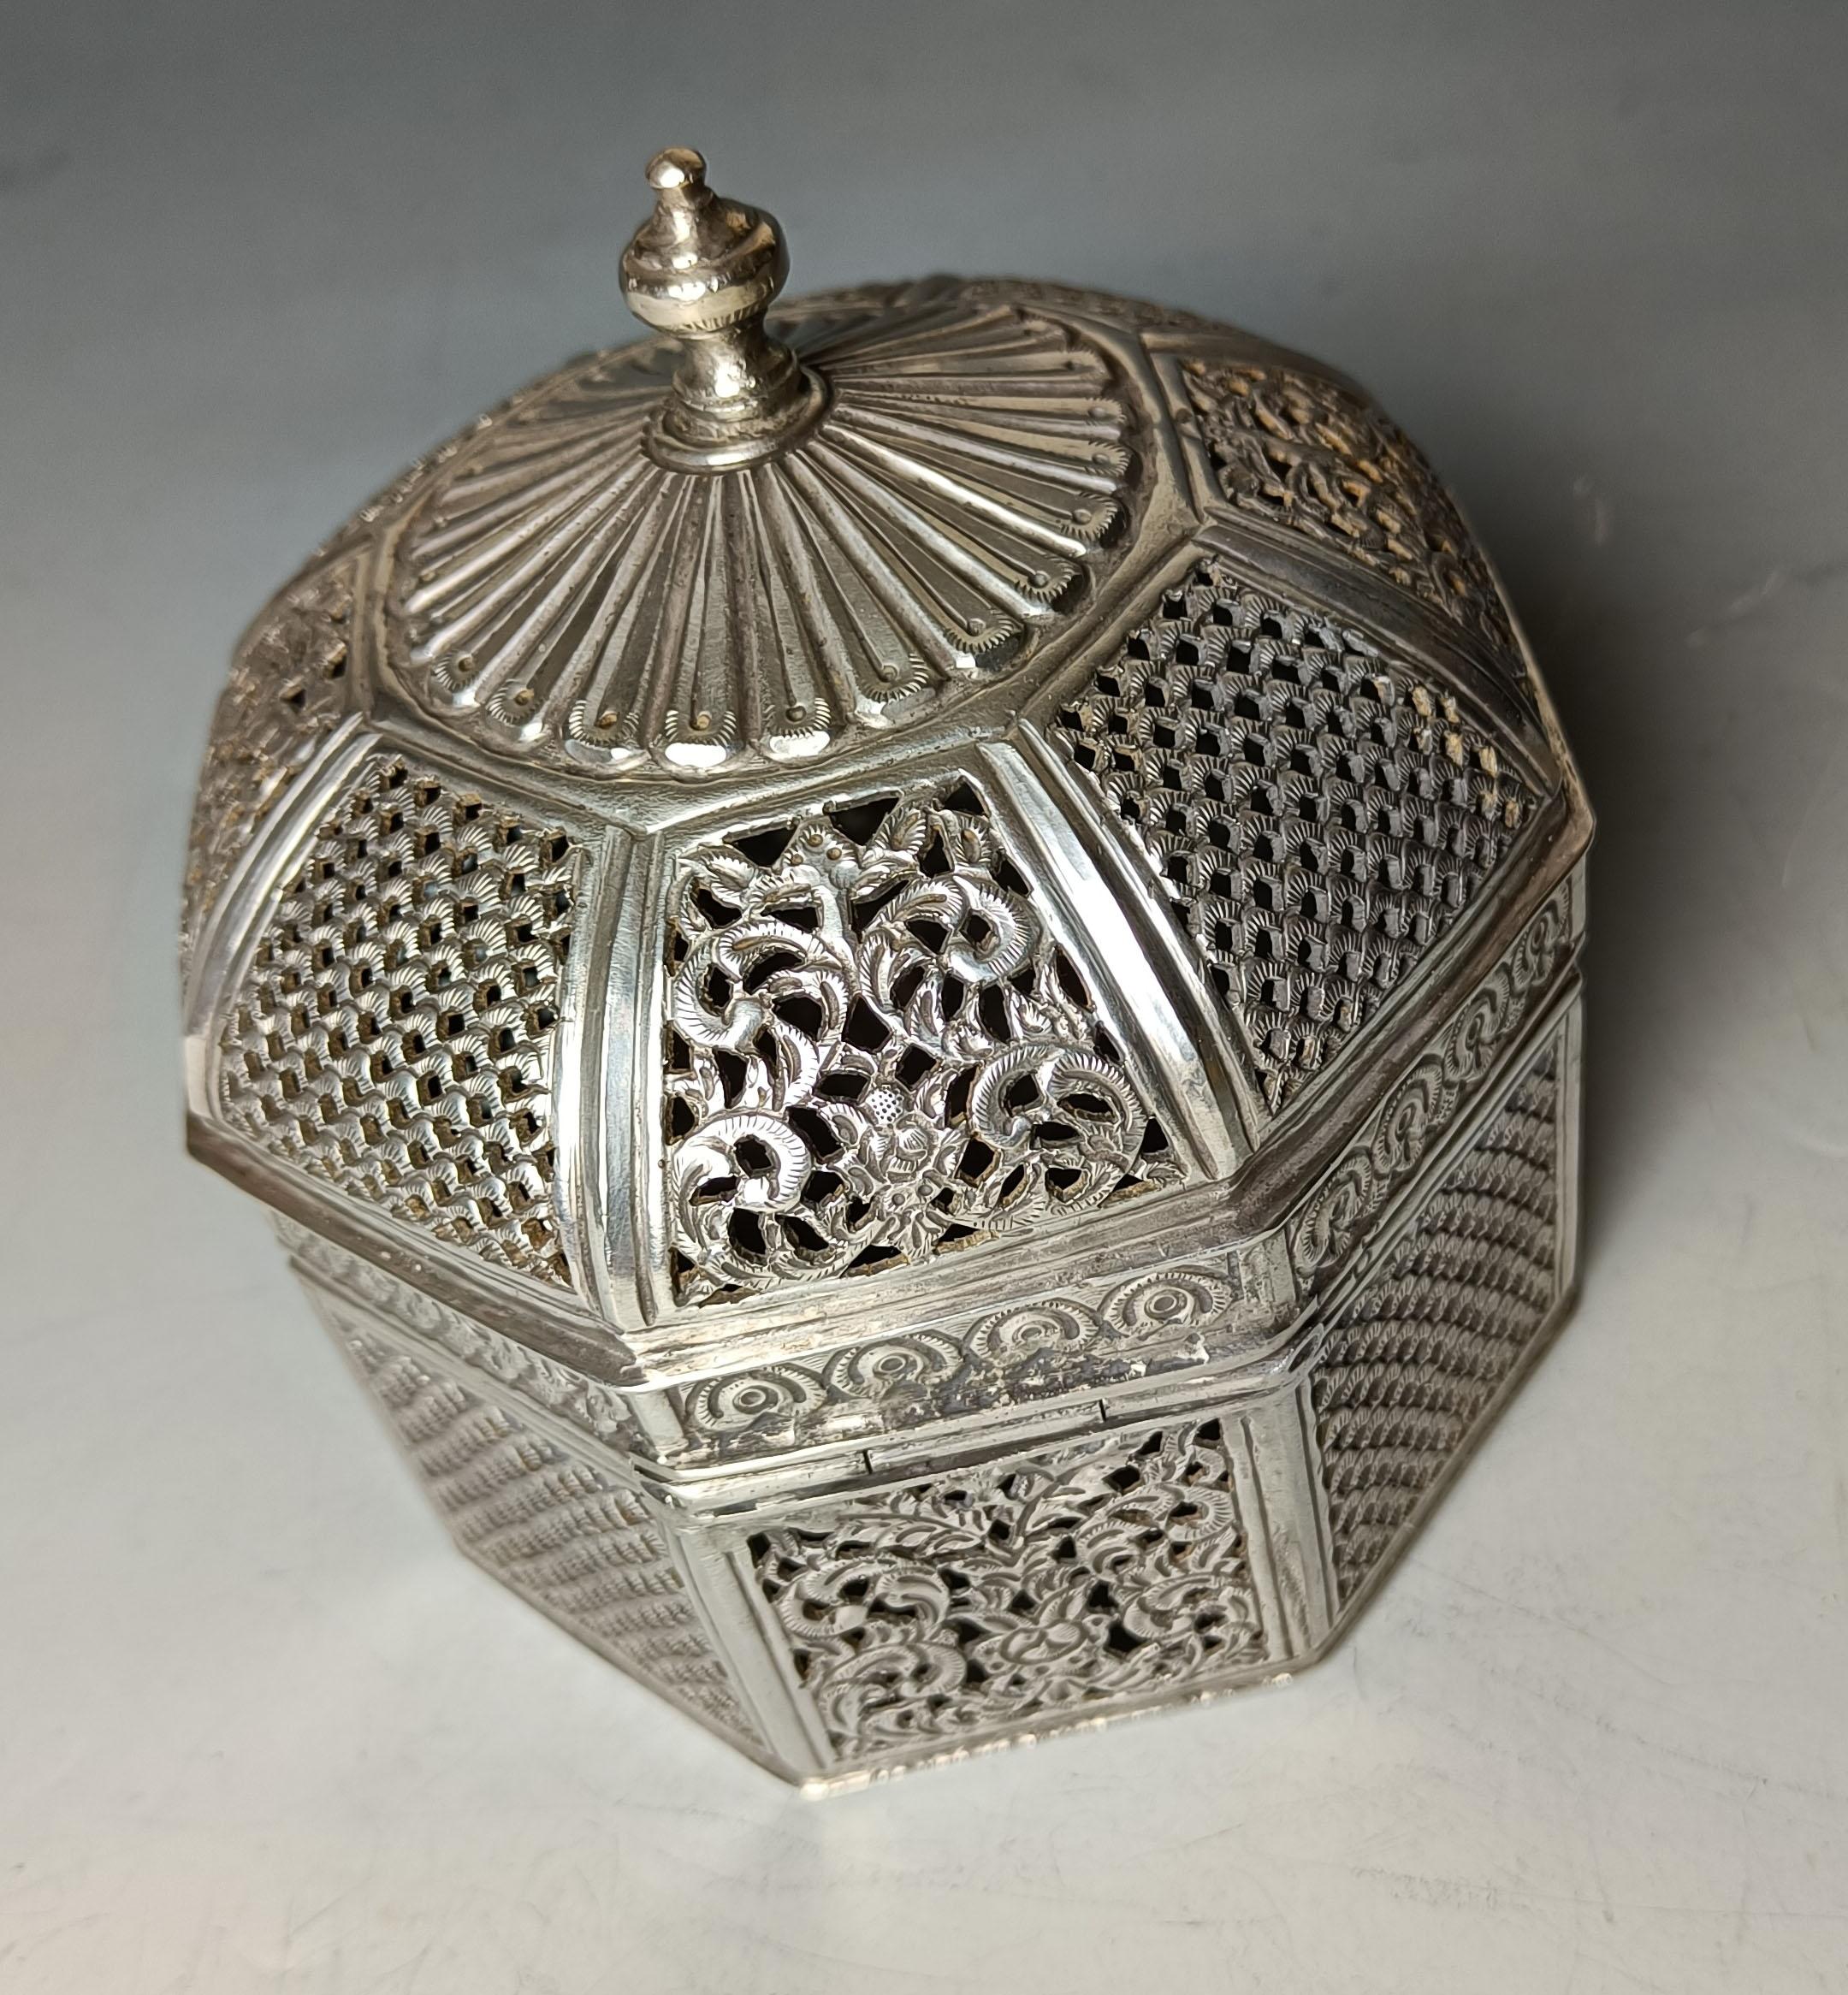 Hand-Crafted Superb Rare large Octagonal Domed Indian Mughal Silver Box Antiques Asian Art For Sale